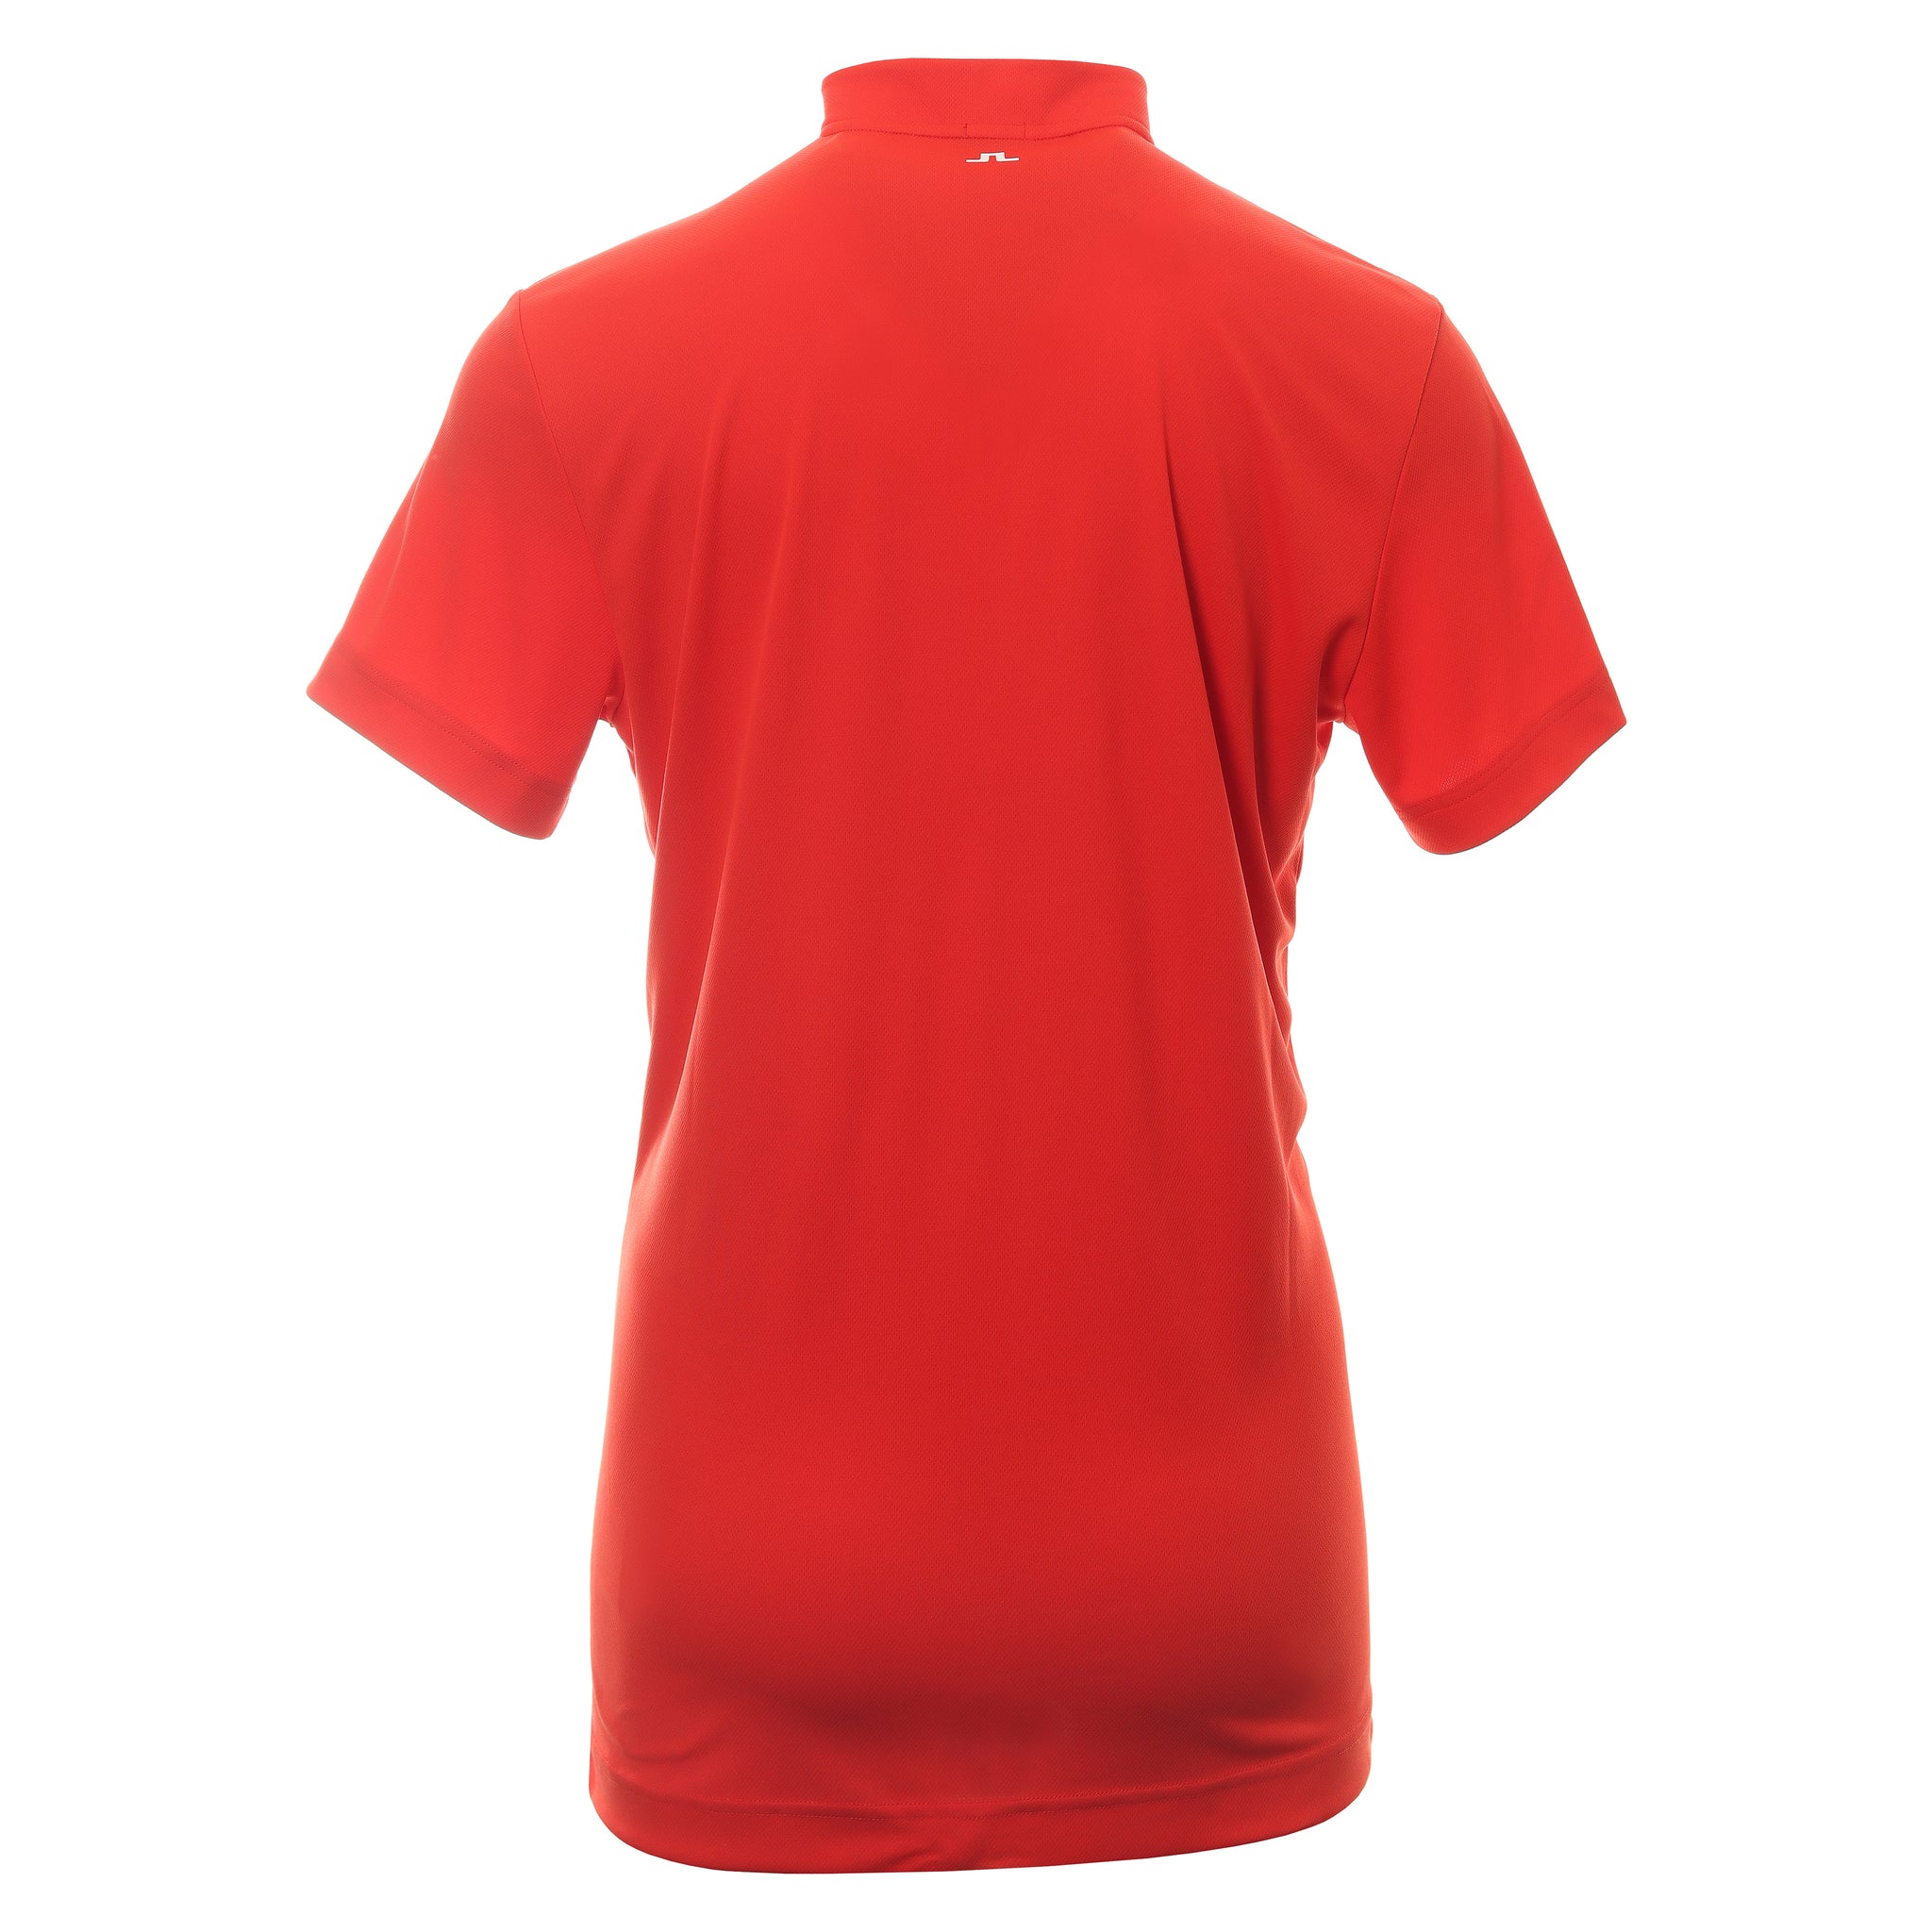 J.Lindeberg Golf Bode Polo Shirt GMJT07618 Fiery Red G135 | Function18 ...